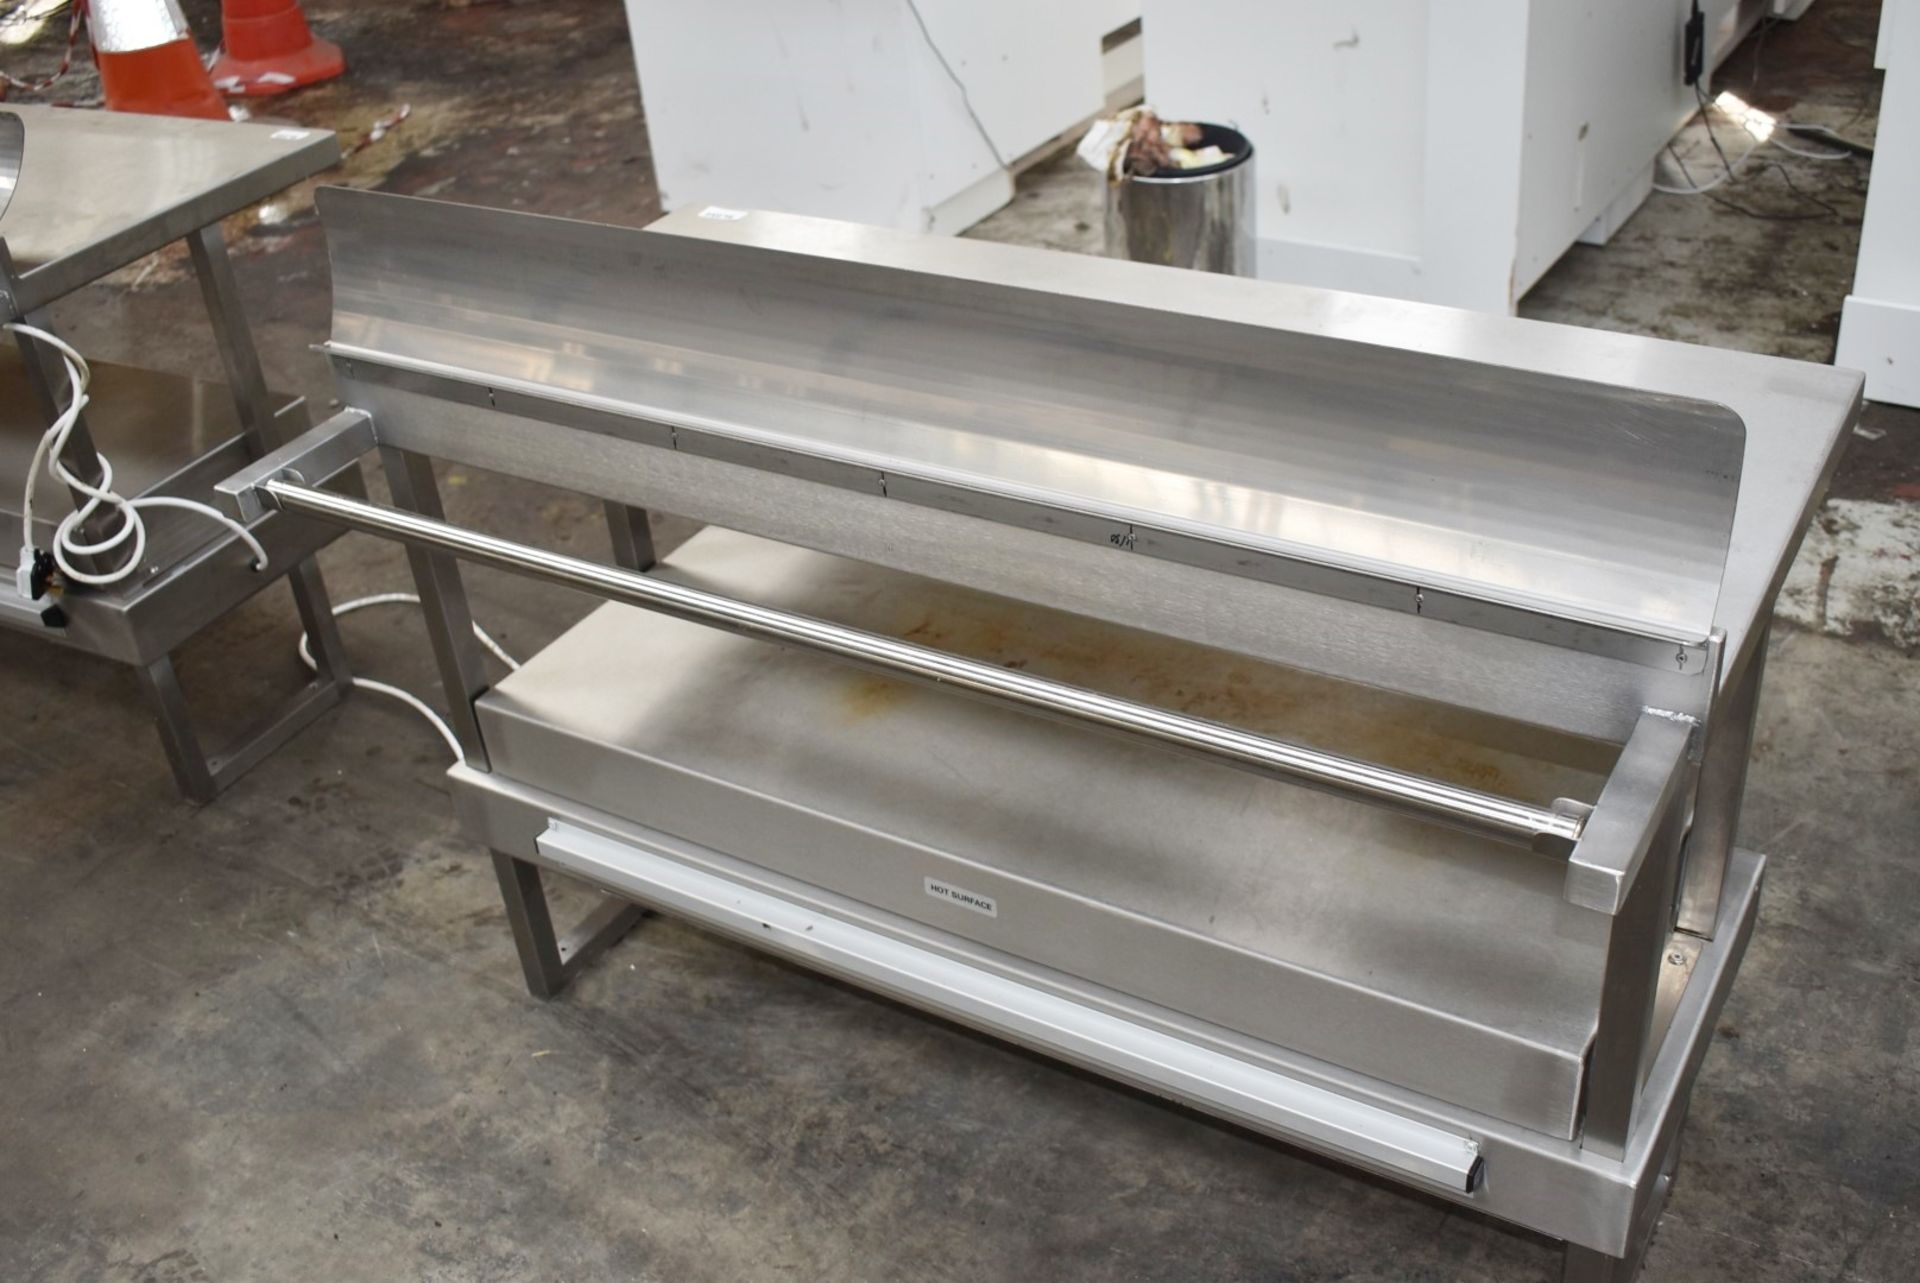 1 x Stainless Steel Bench Mounted Passthrough Food Warmer With Ticket Rails Ref SL254 WH4 - - Image 2 of 5